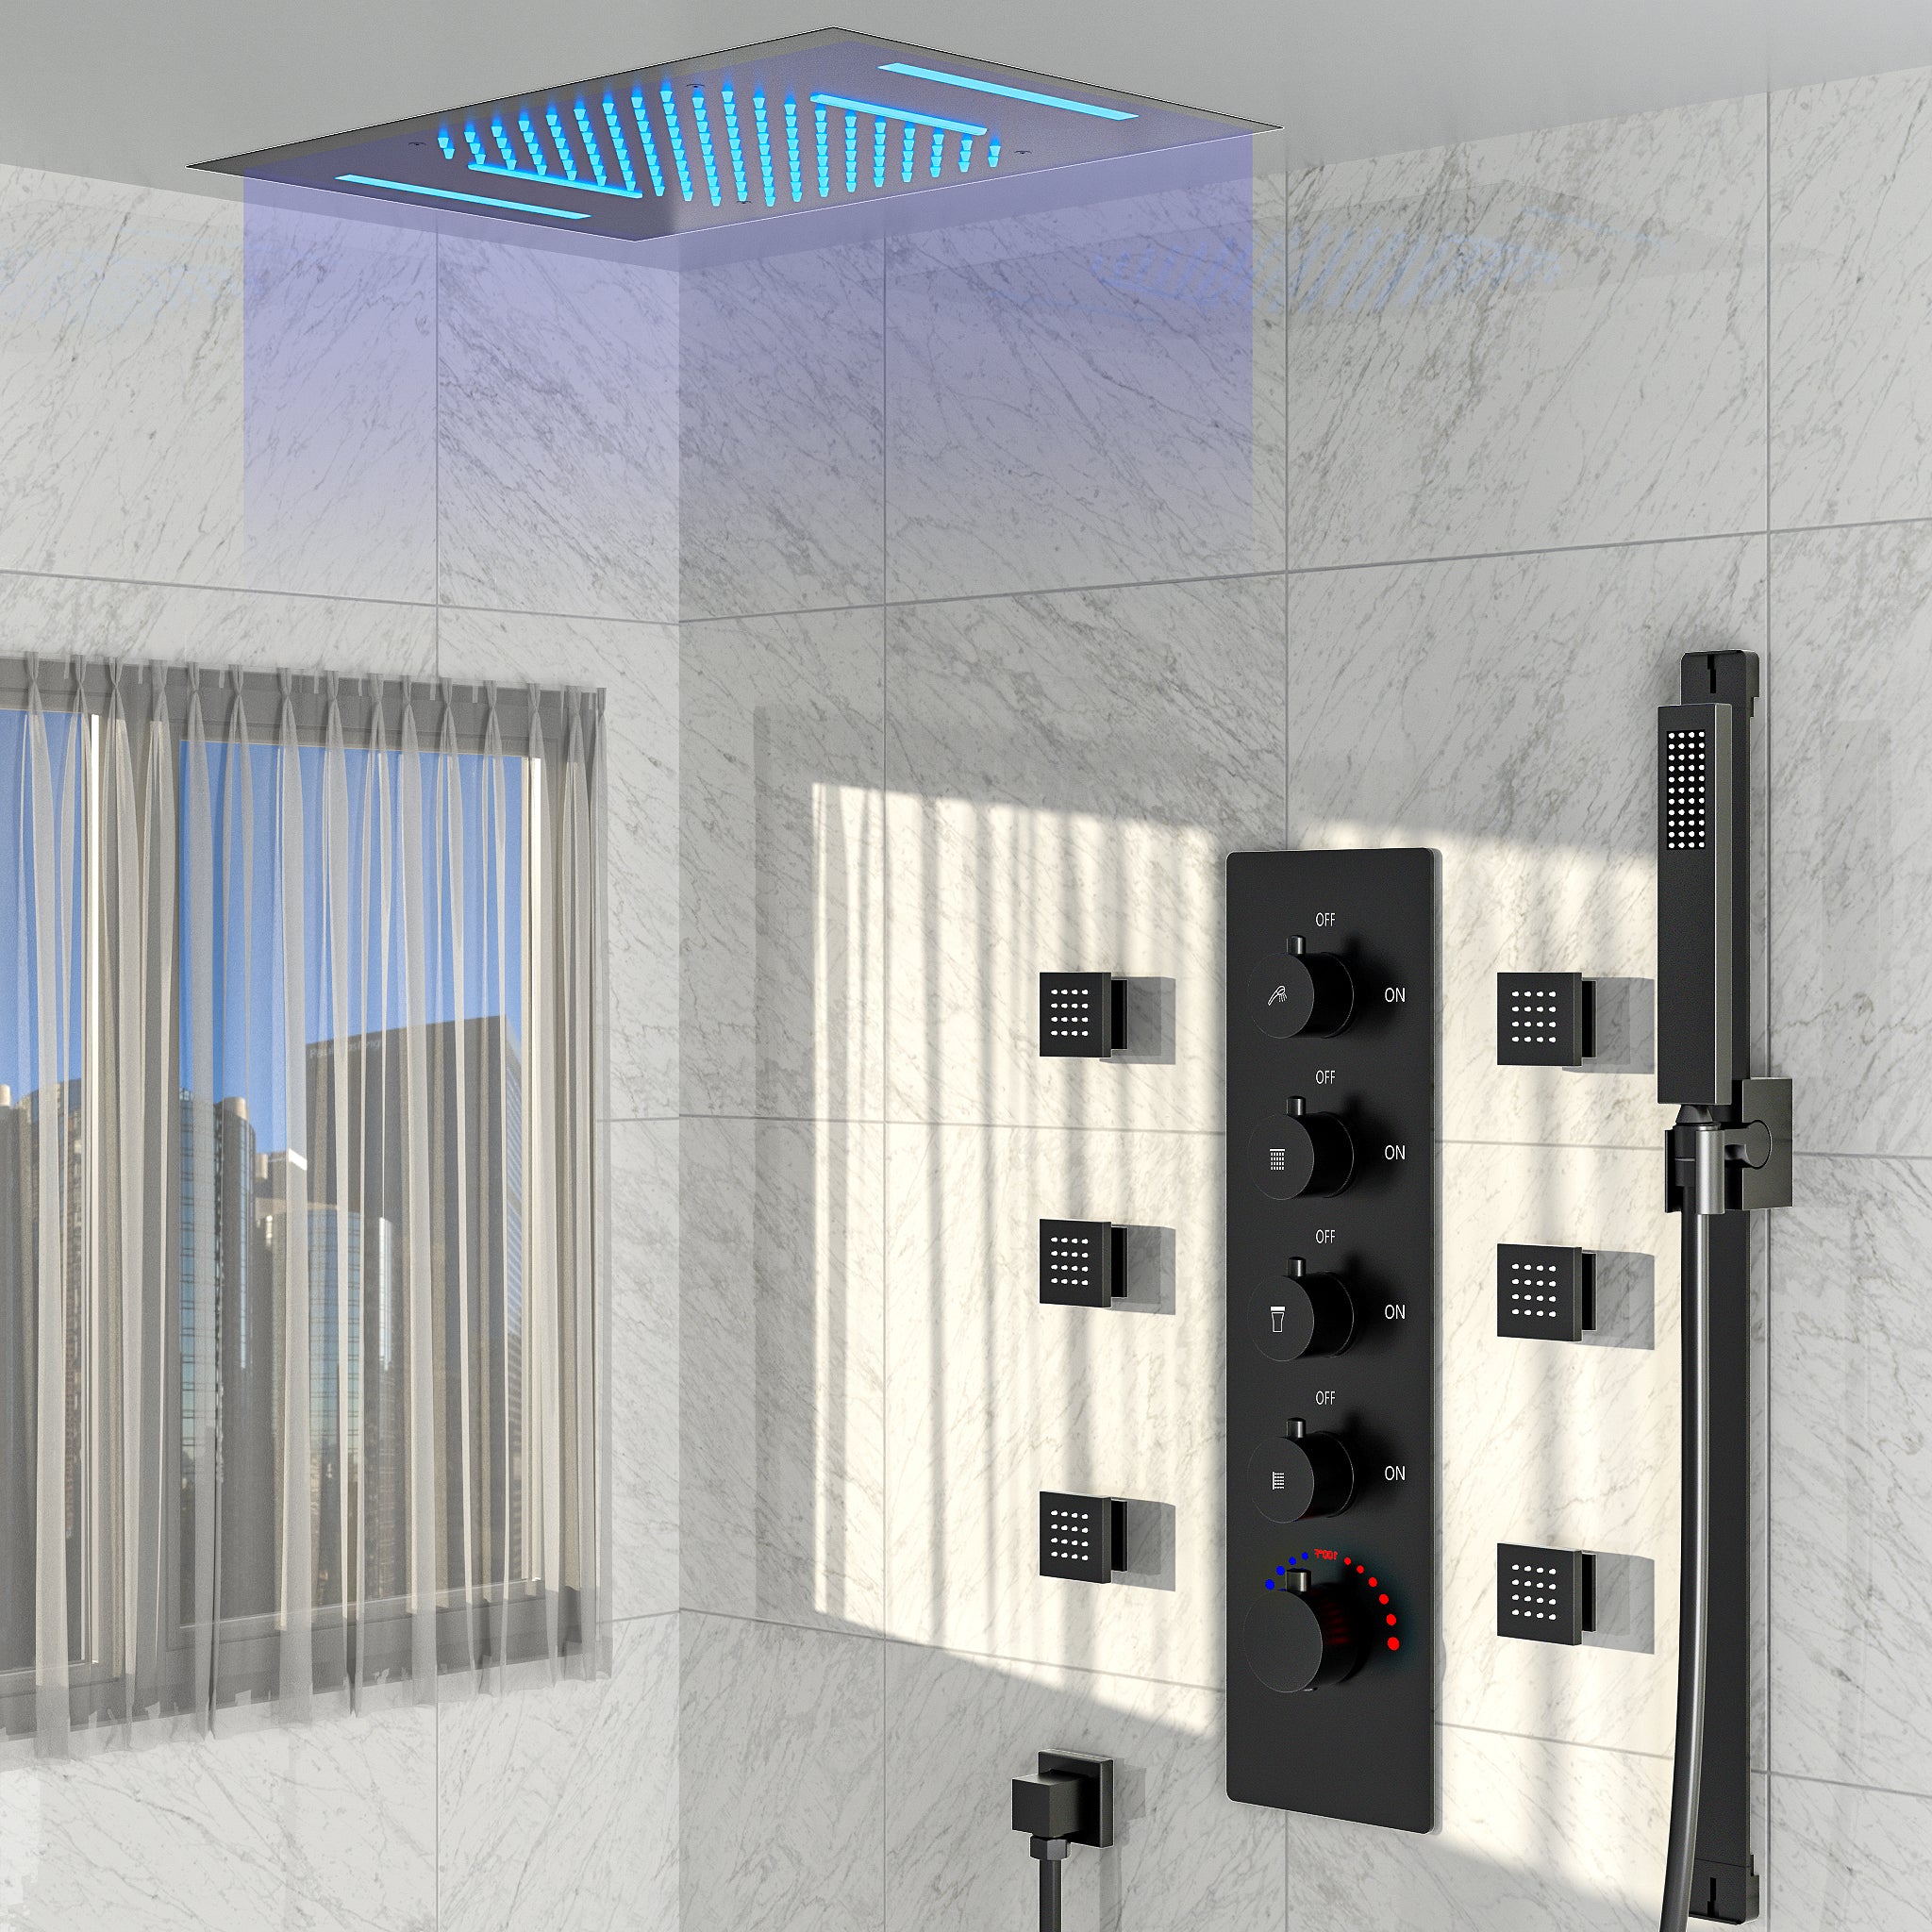 SFS-1025-BK EVERSTEIN LED Dual Function Thermostatic Shower Head Shower Head System with Rough-in Valve